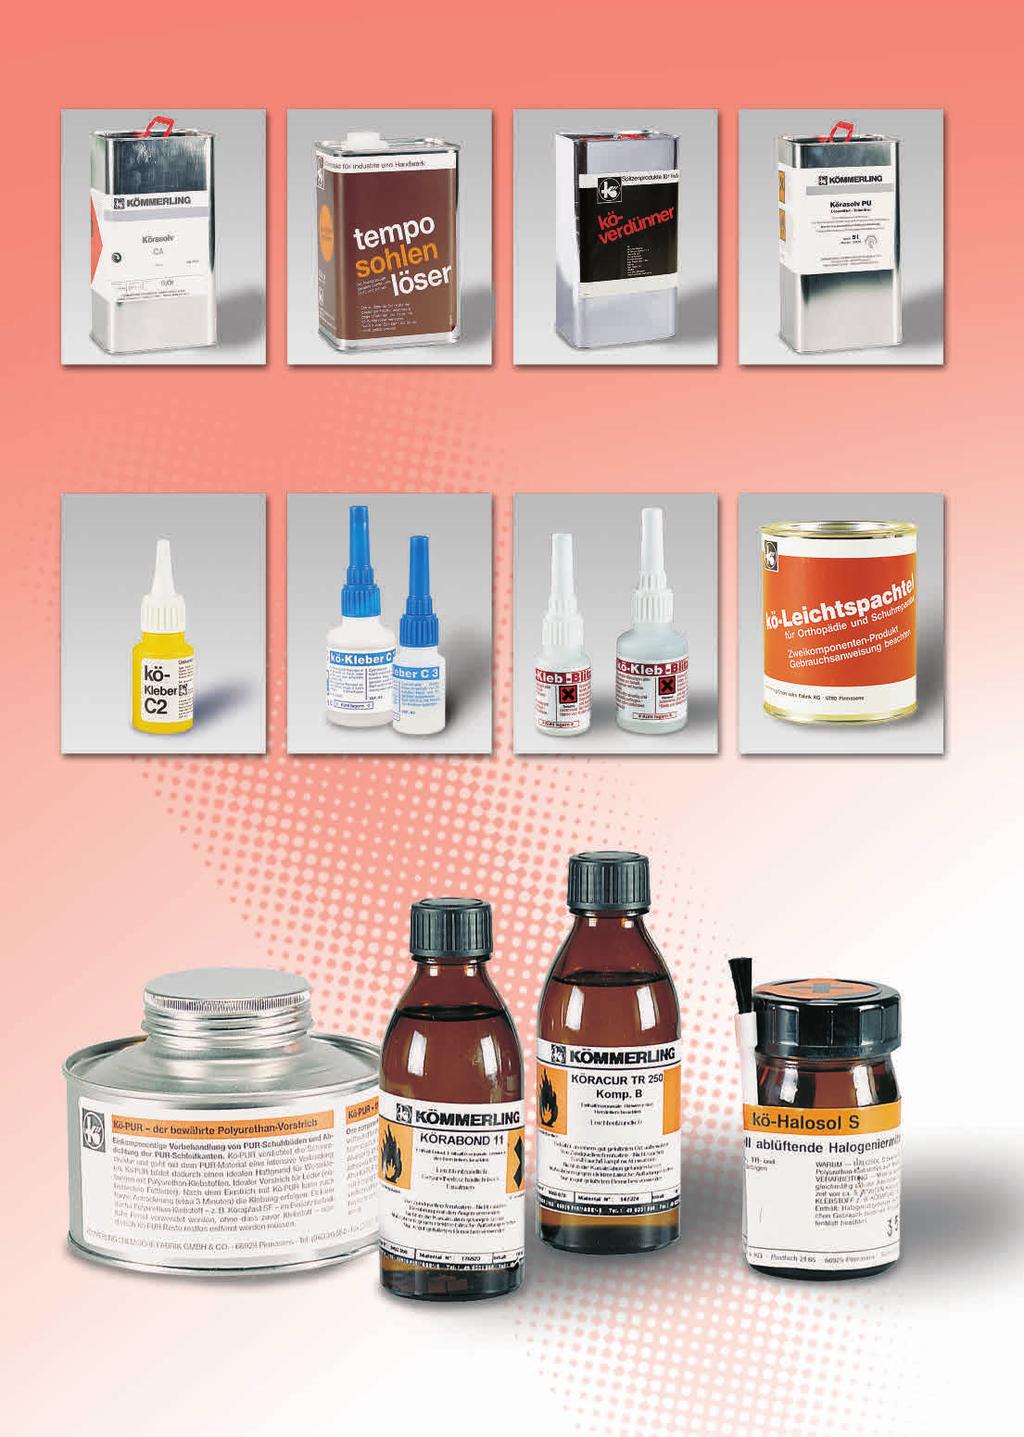 Chemical Products 4. 08 151 530 990 00 Körasolv CA solvent for PU, toluene-free canister 1 l, 5 l, 10 l 151 192 580 00 Kö Tempo sole remover universally suitable sole remover canister 0.